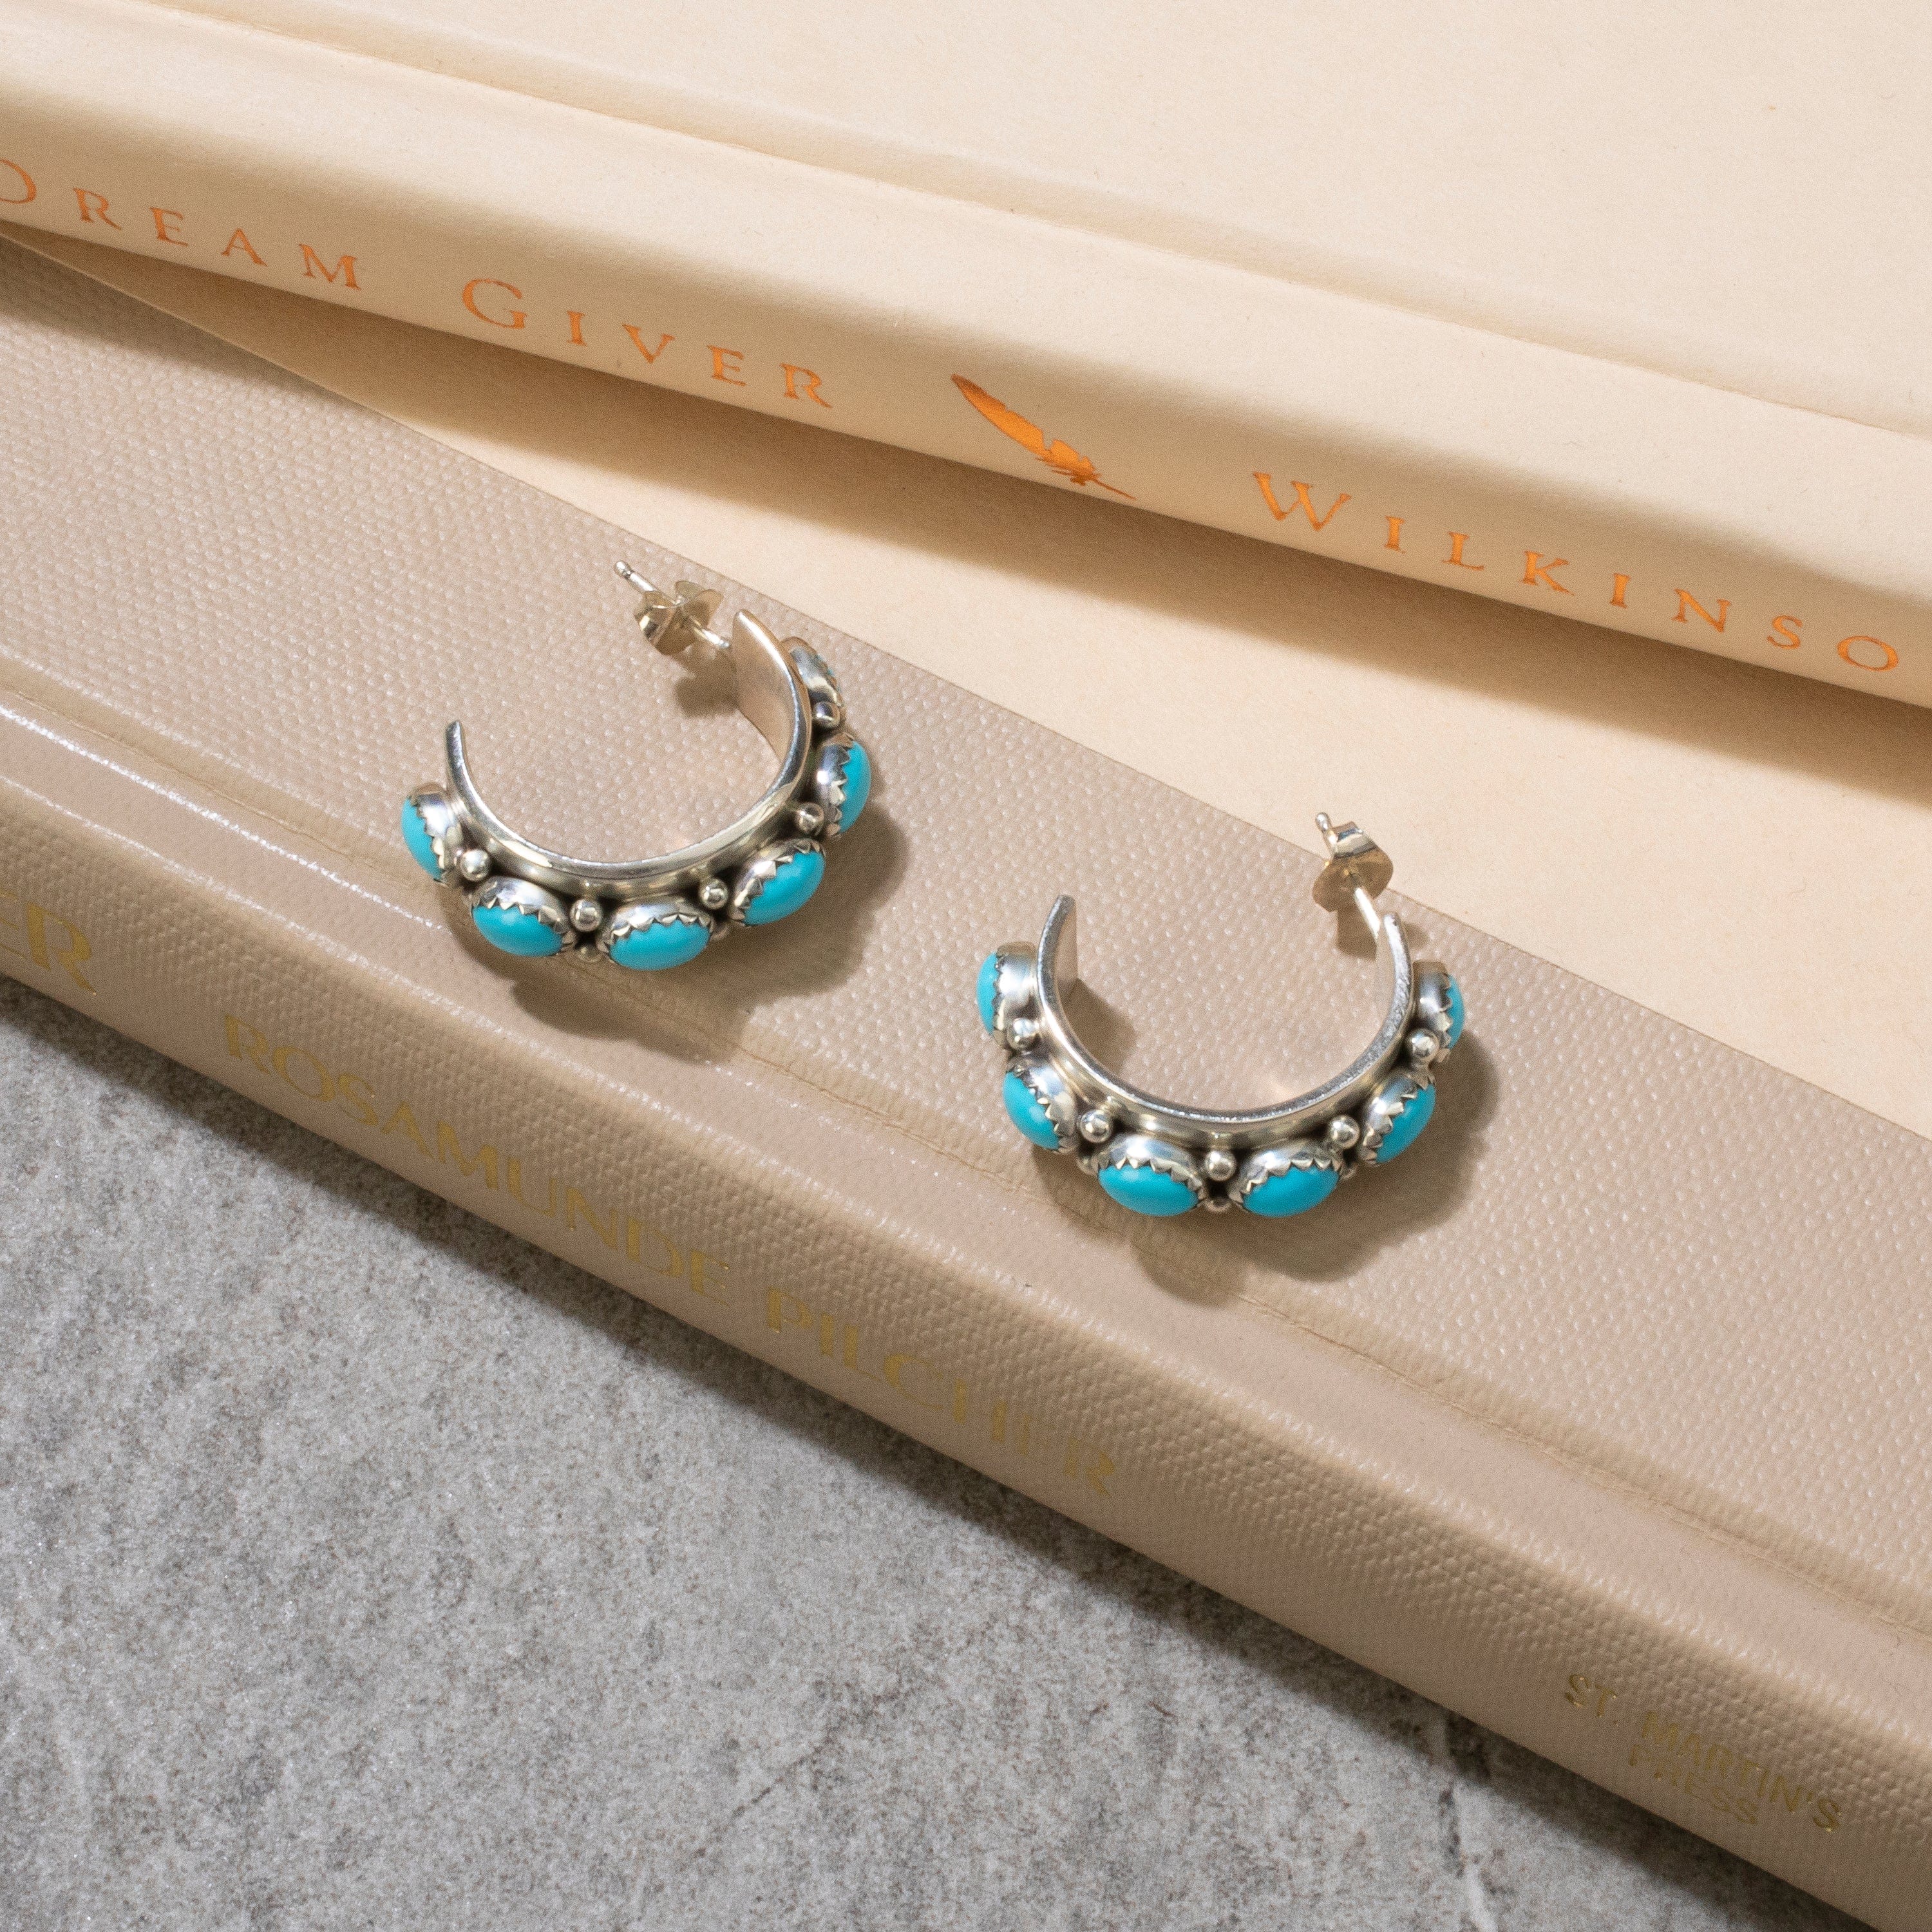 Kalifano Native American Jewelry Sleeping Beauty Turquoise Semi Hoop Navajo USA Native American Made 925 Sterling Silver Earrings with Stud Backing NAE700.006